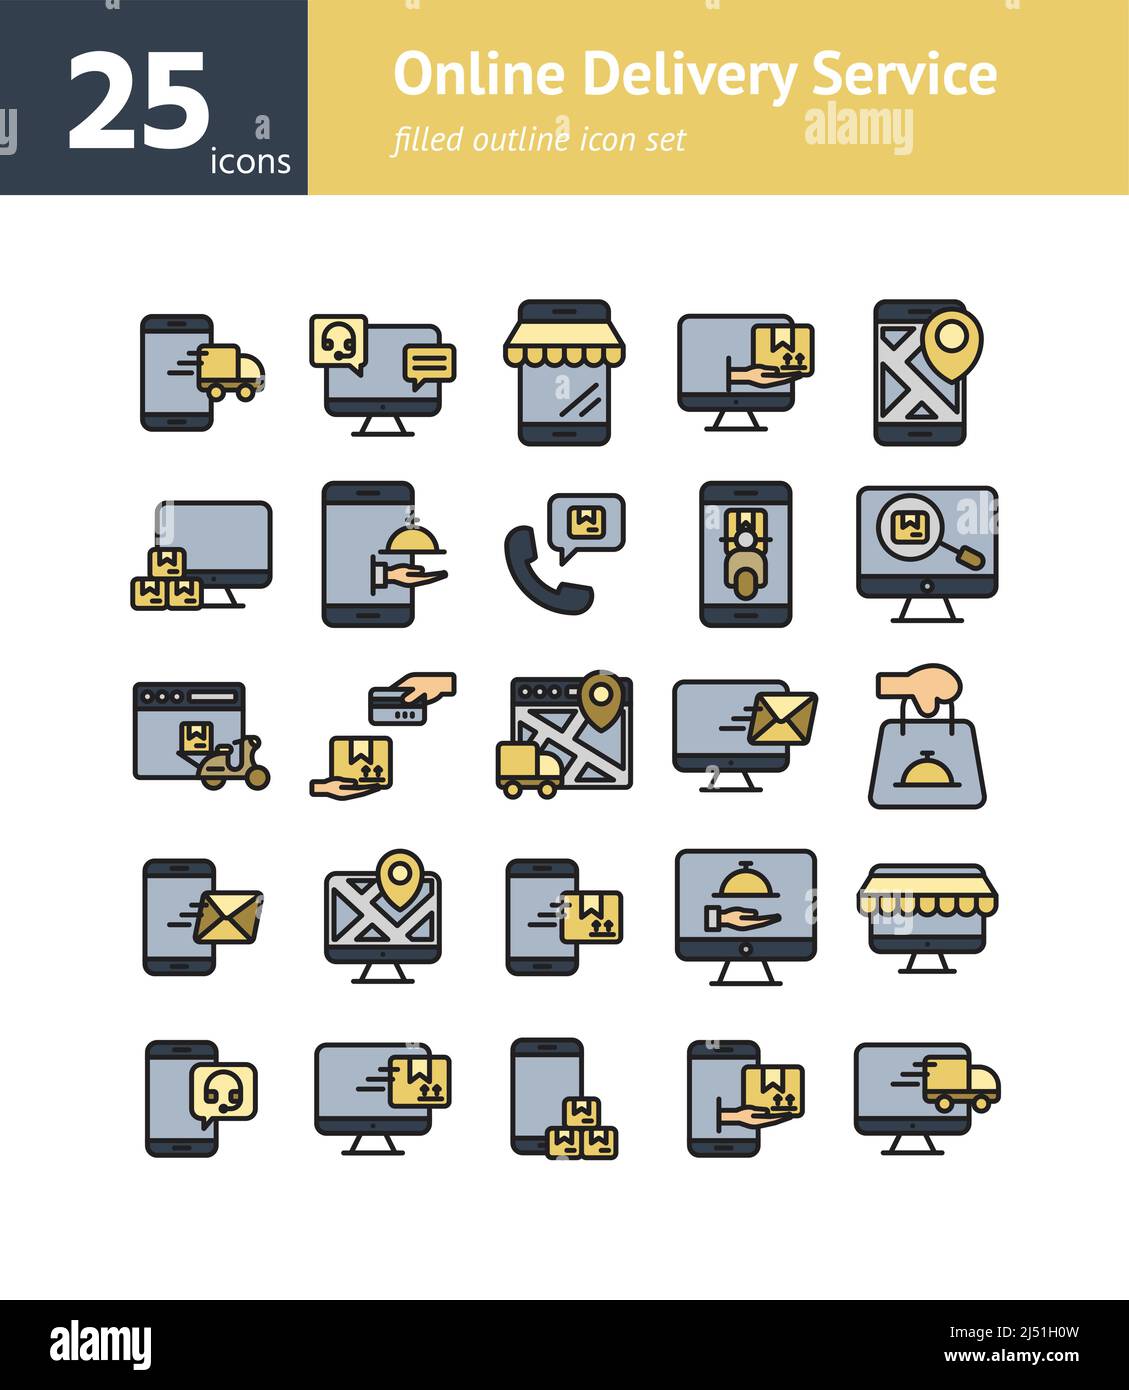 Online Delivery Service filled outline icon set. Vector and Illustration. Stock Vector